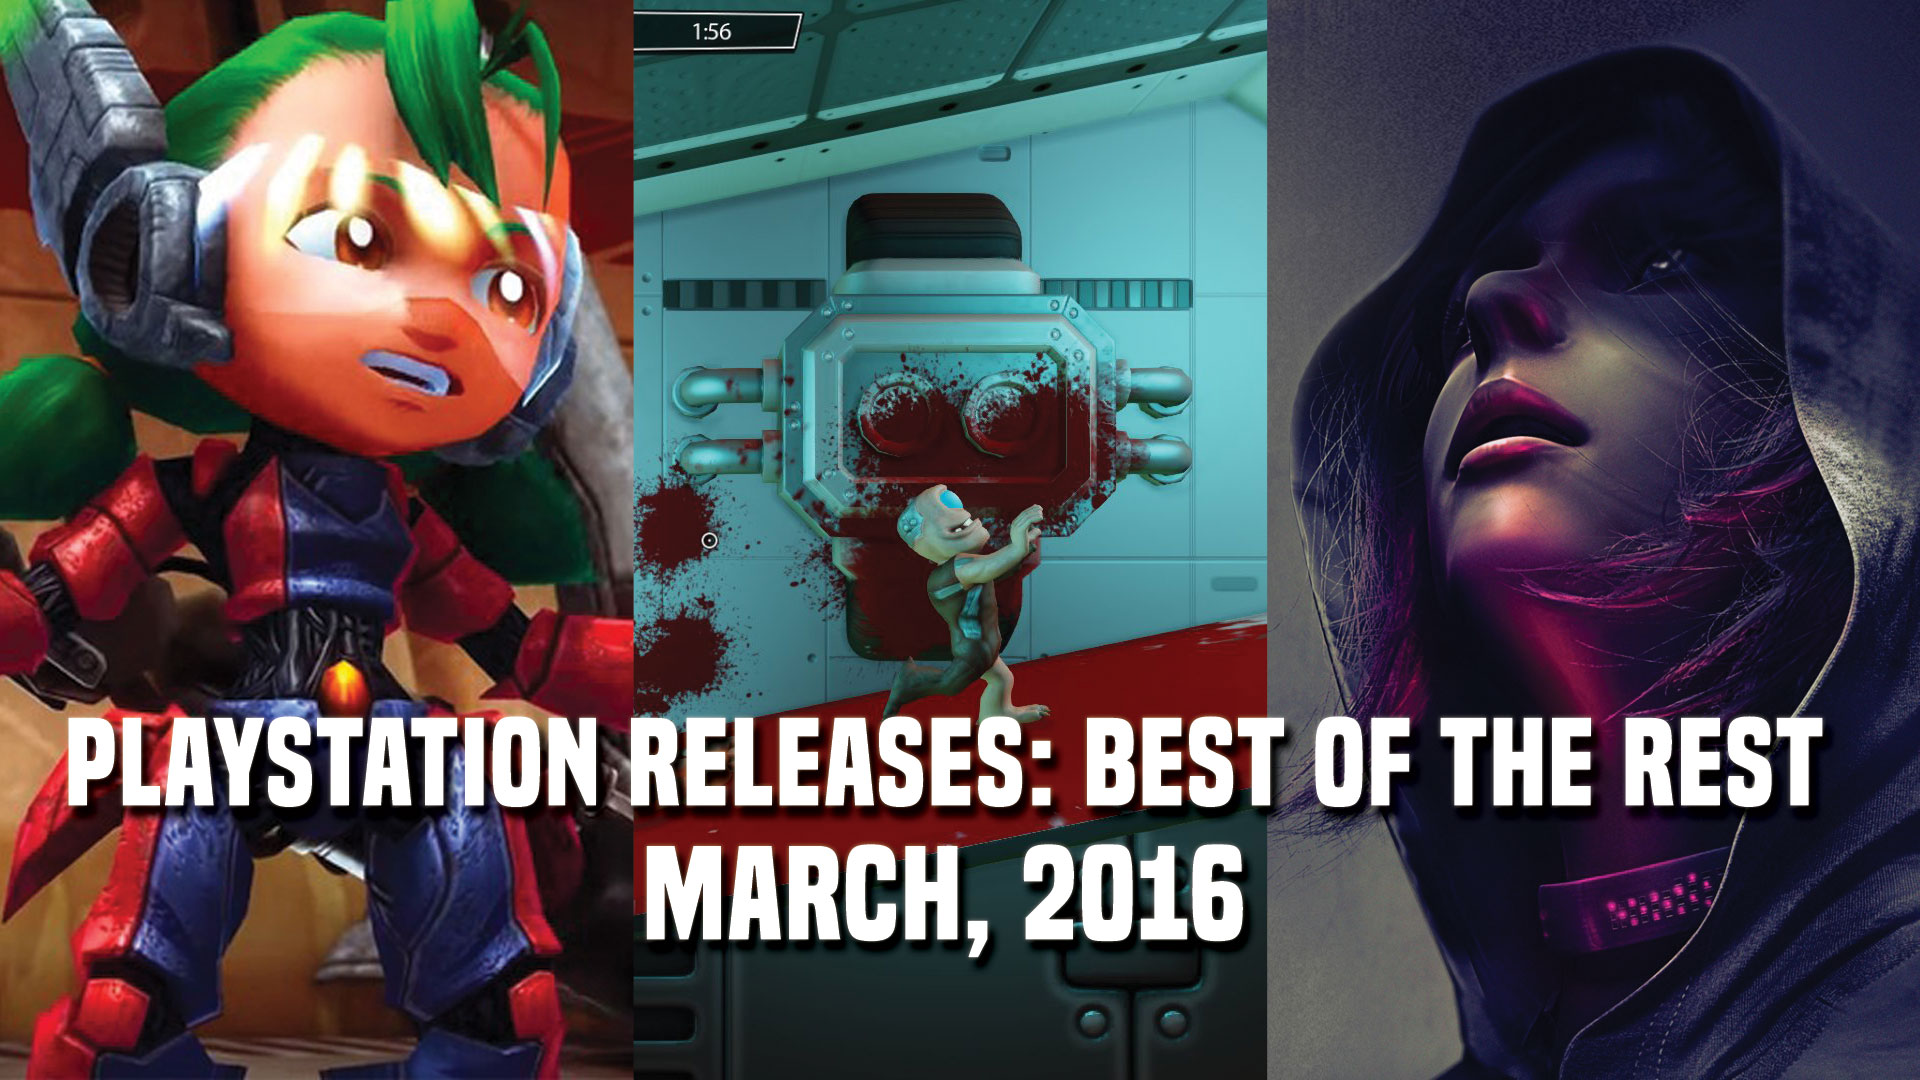 PlayStation Releases: Best of the Rest - March, 2016